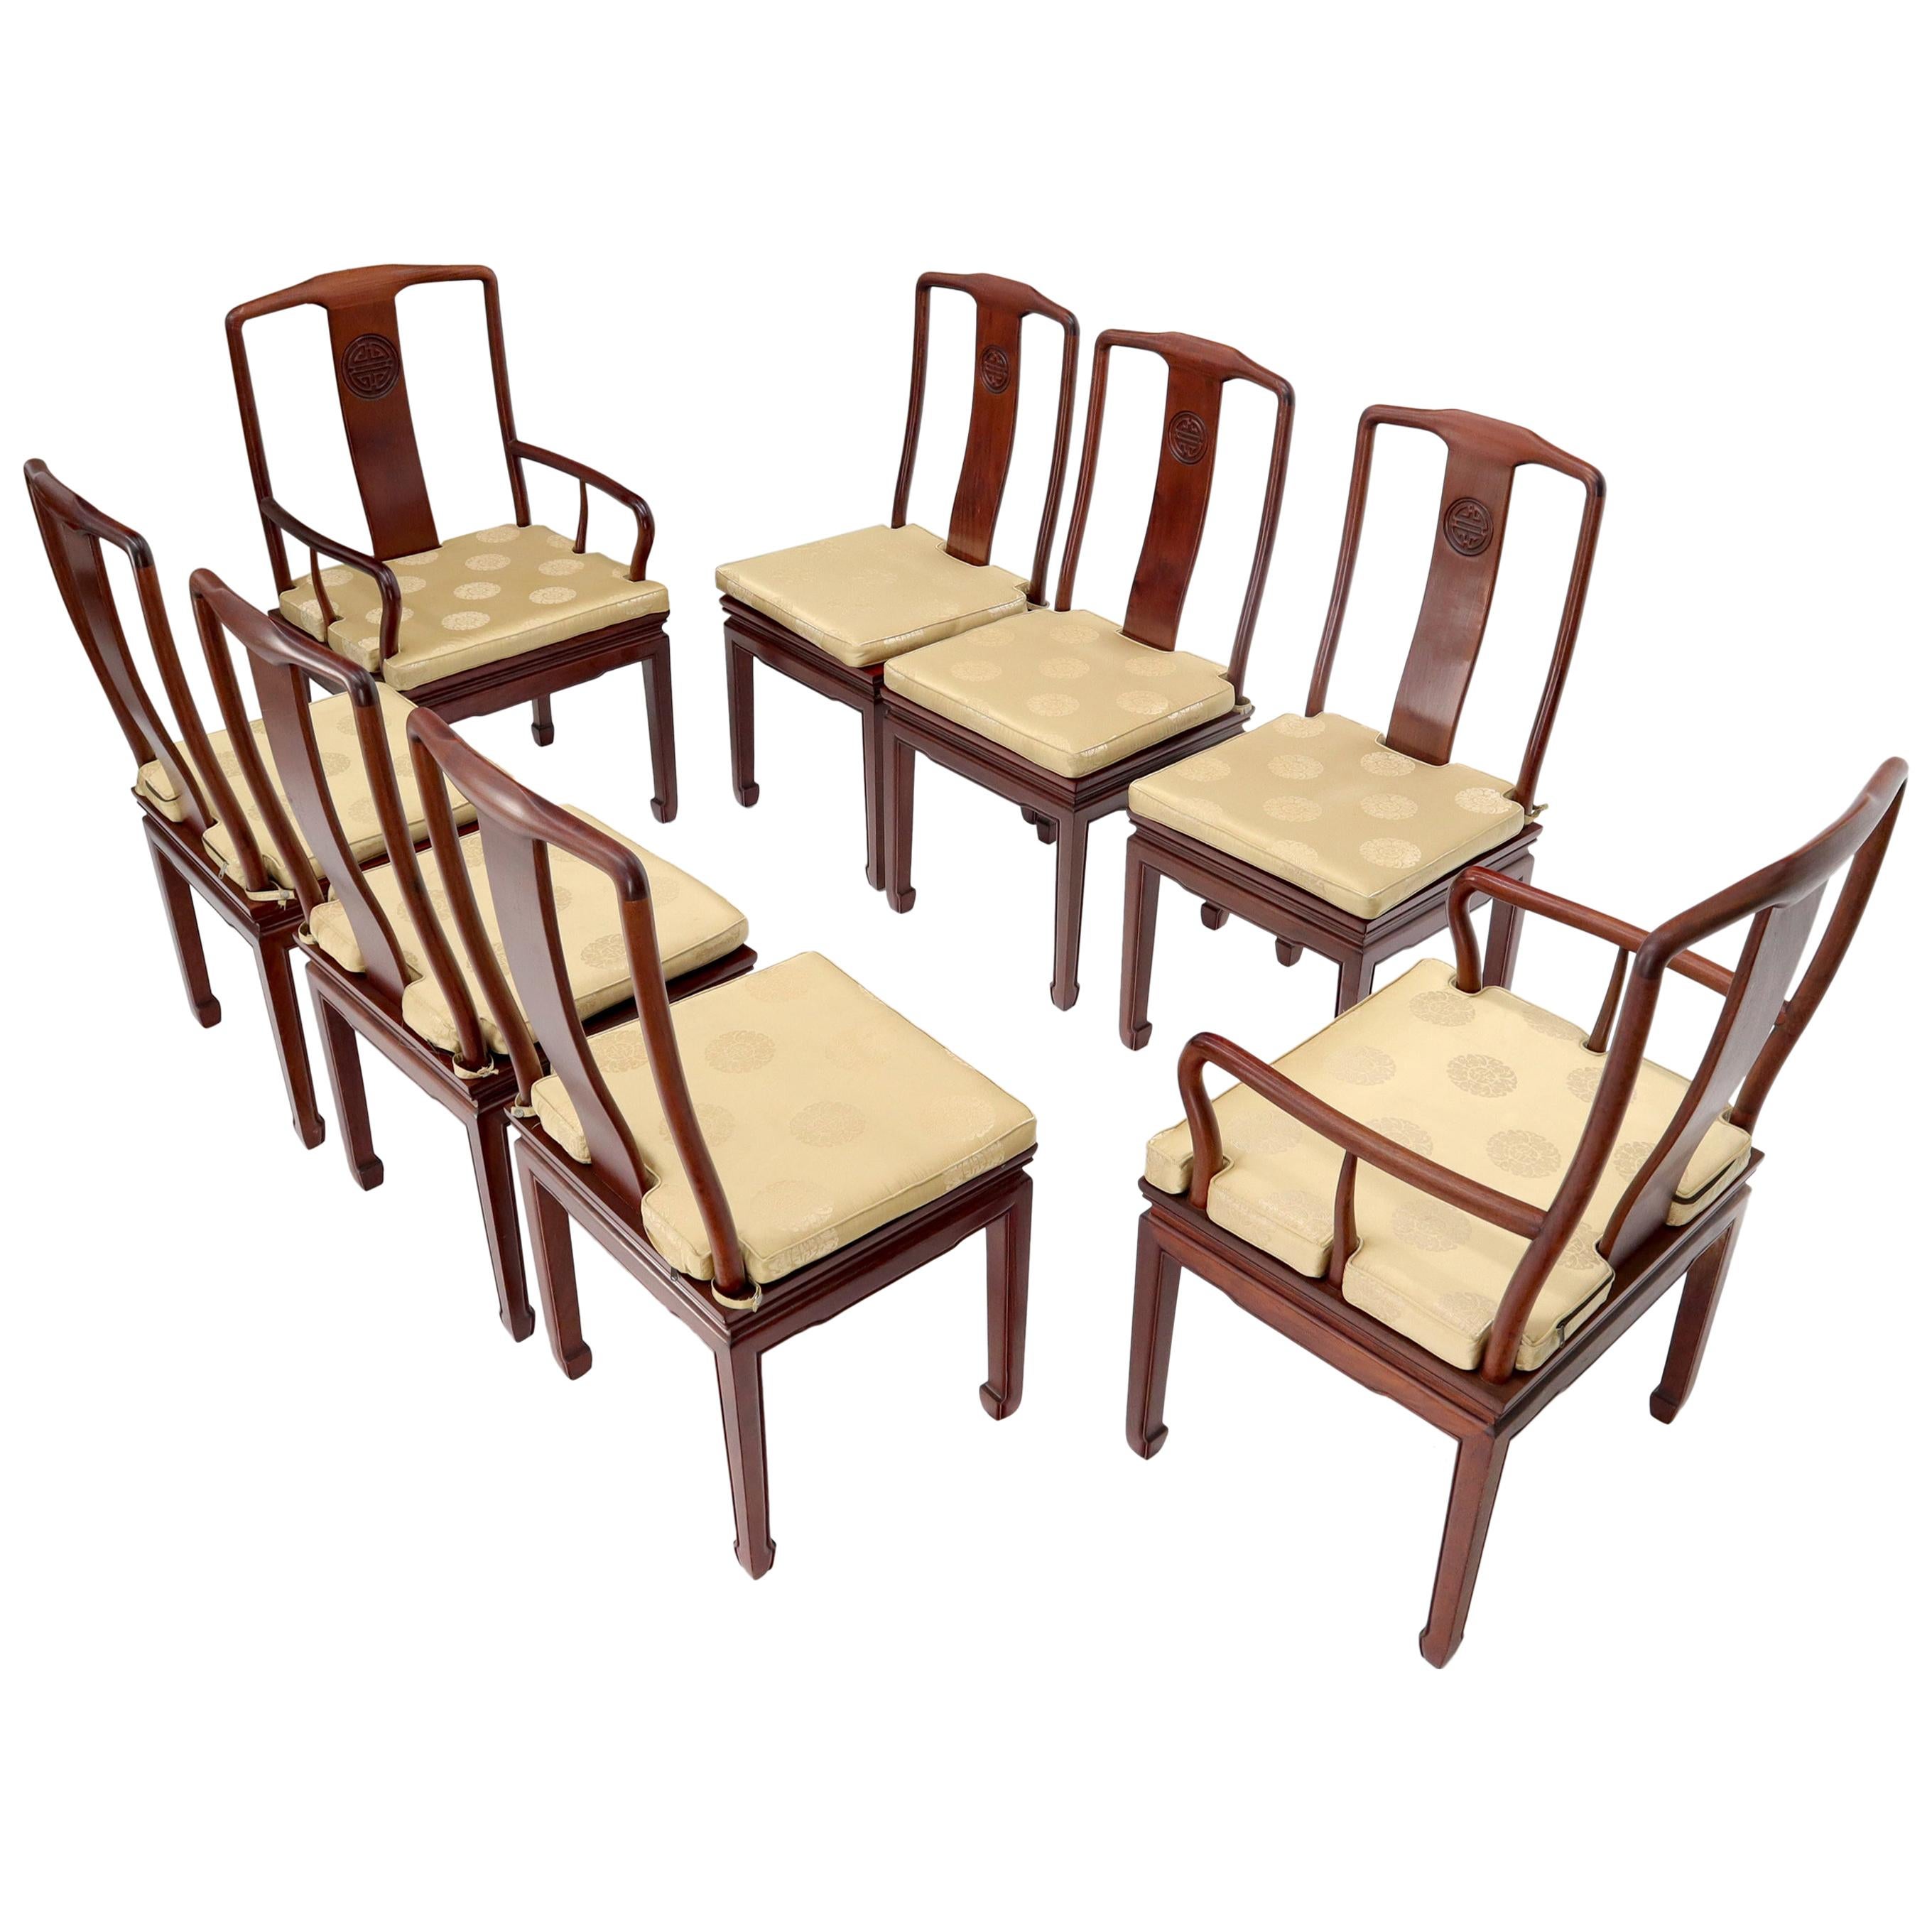 Set of 8 Solid Rosewood High Quality Chinese Asian Dining Room Chairs For Sale